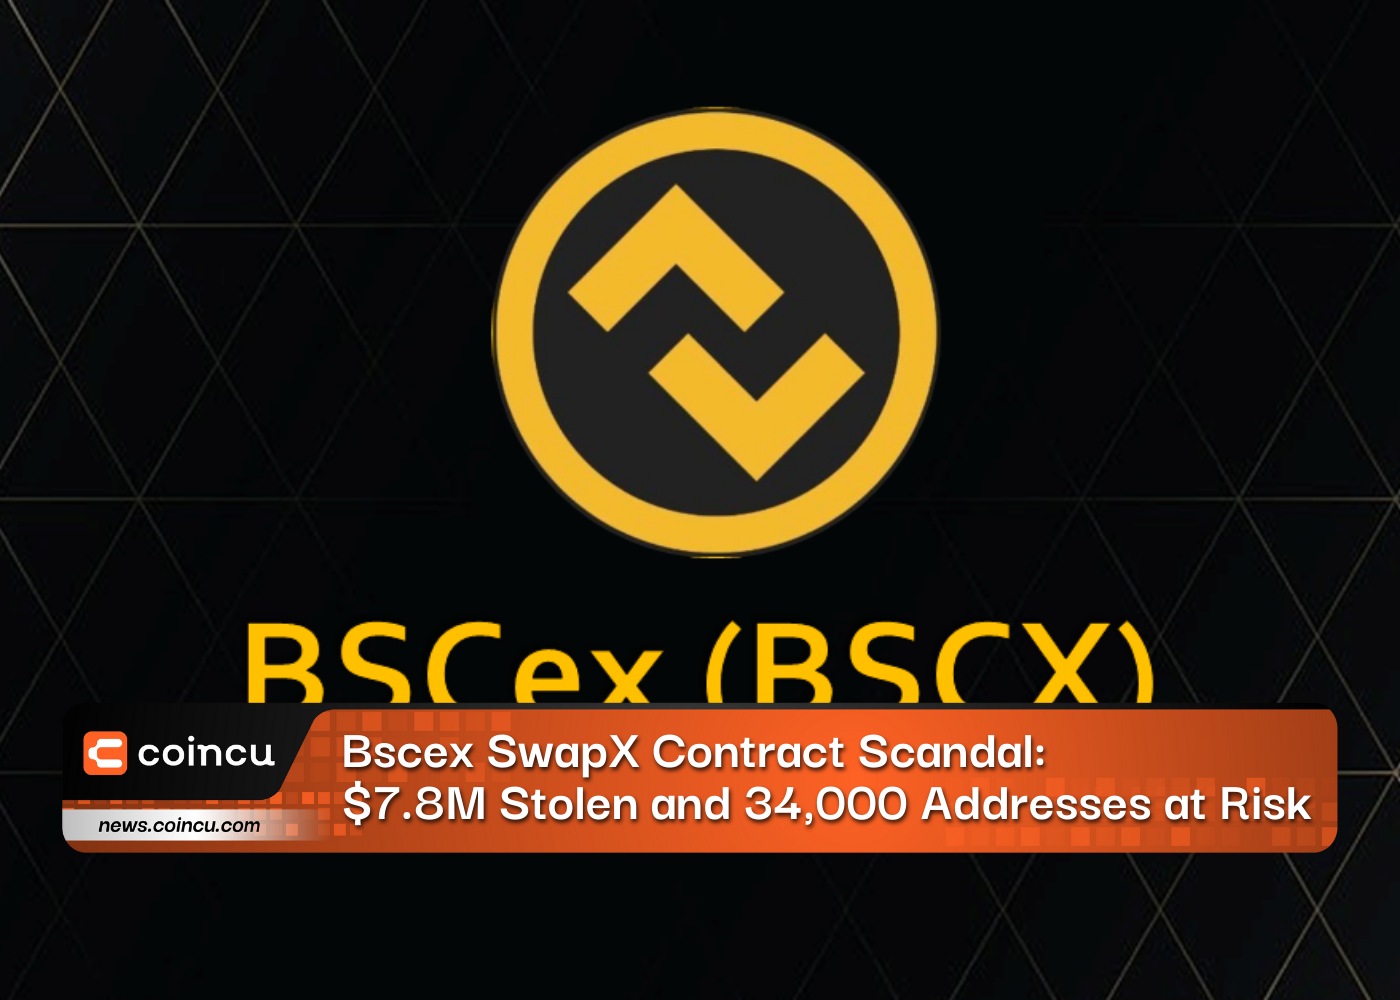 Bscex SwapX Contract Scandal: $7.8M Stolen and 34,000 Addresses at Risk